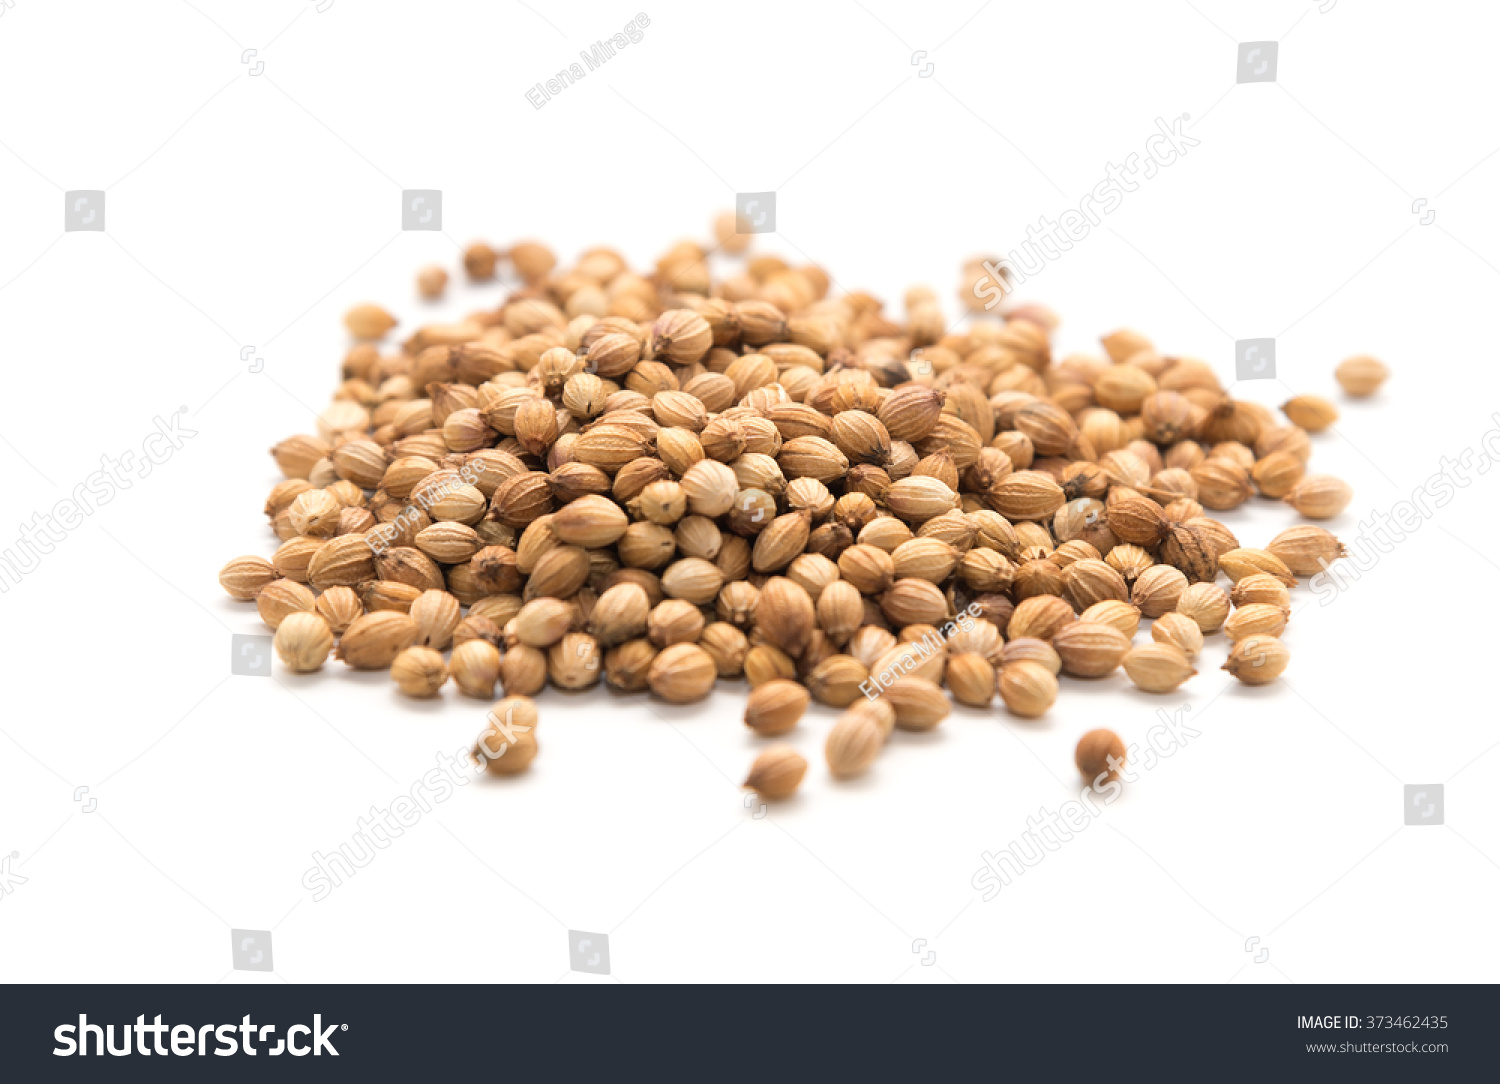 Pile of coriander seeds isolated on white background selective focus #373462435